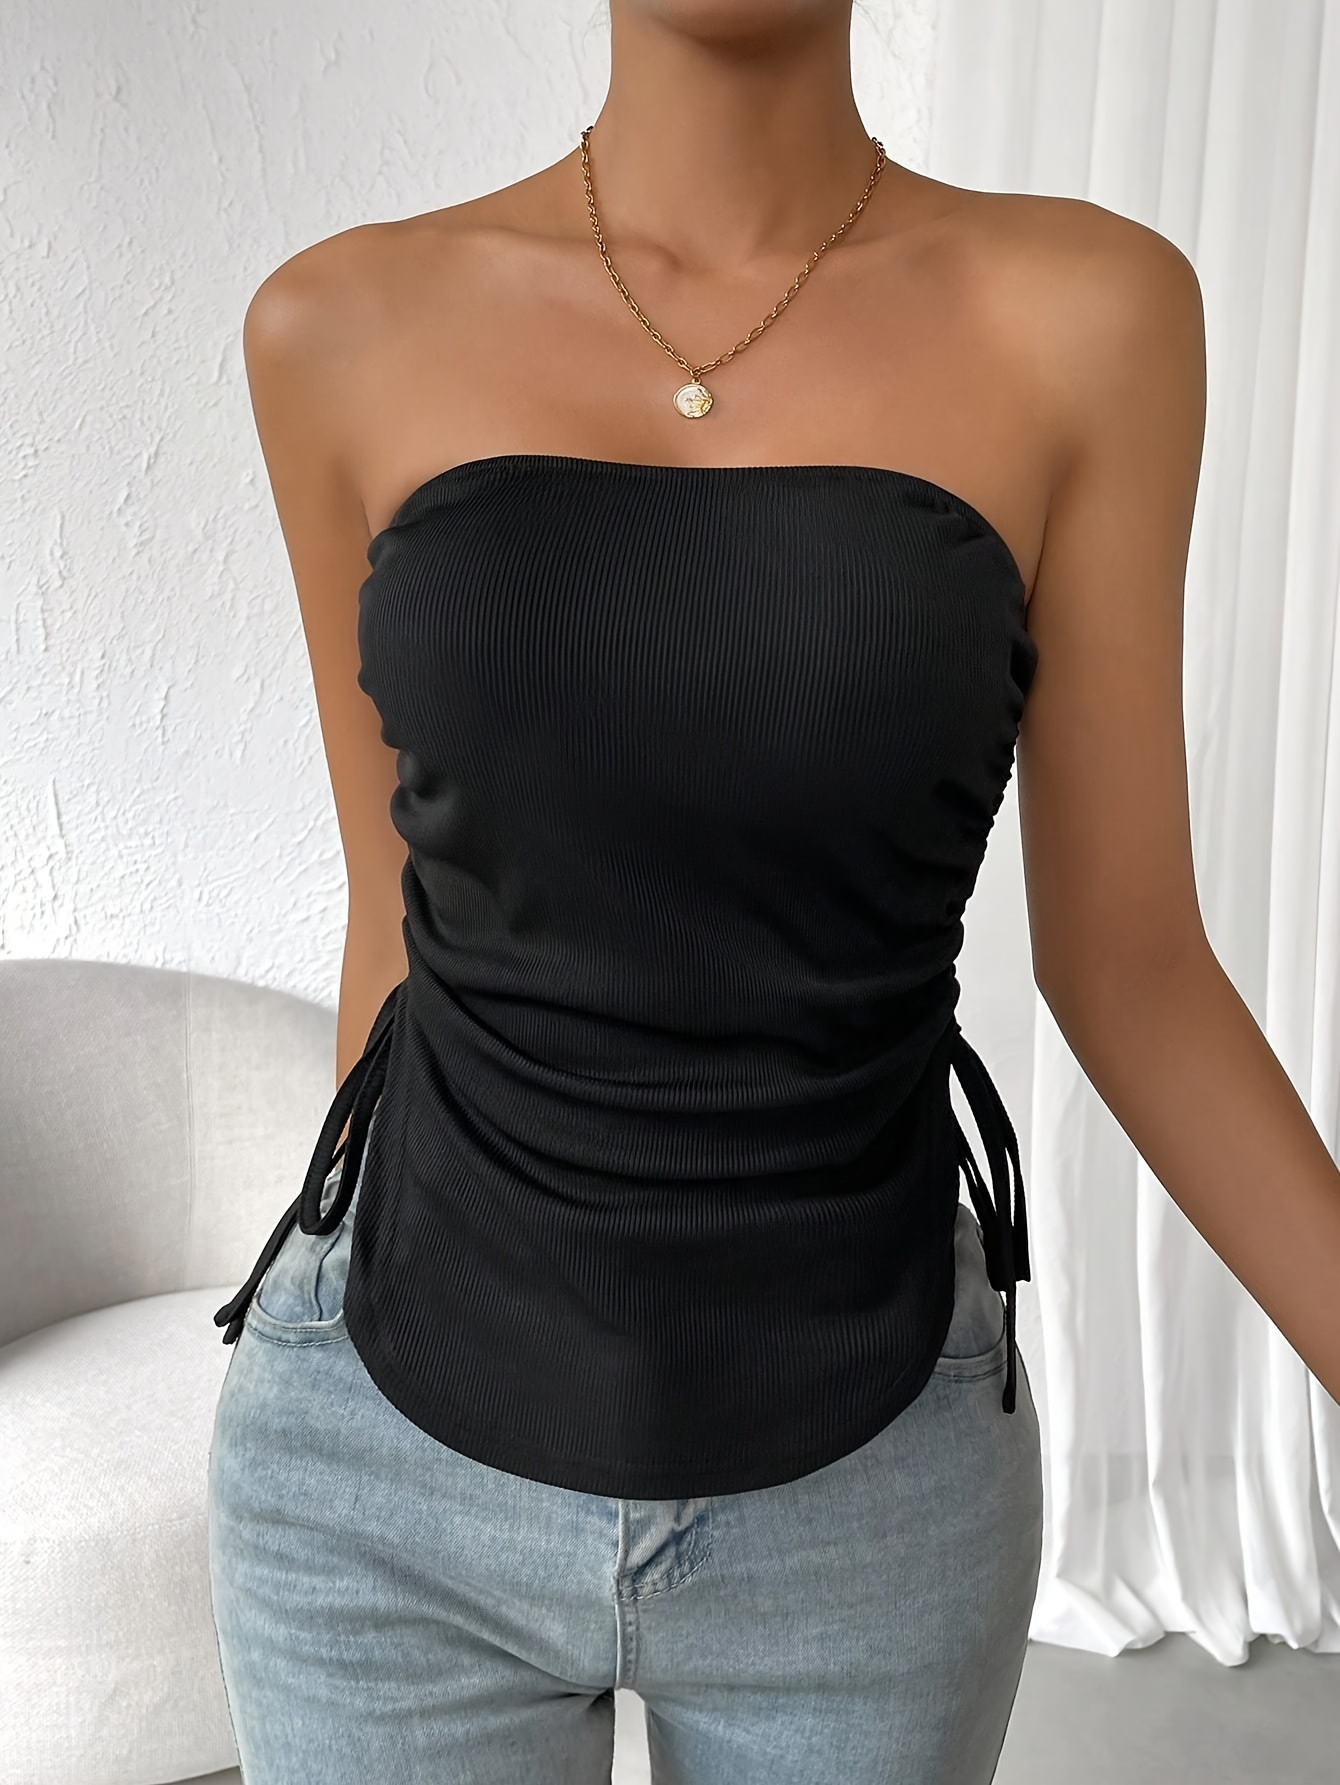 aesthetic outfit backless shirt  Backless top outfit, Fashion